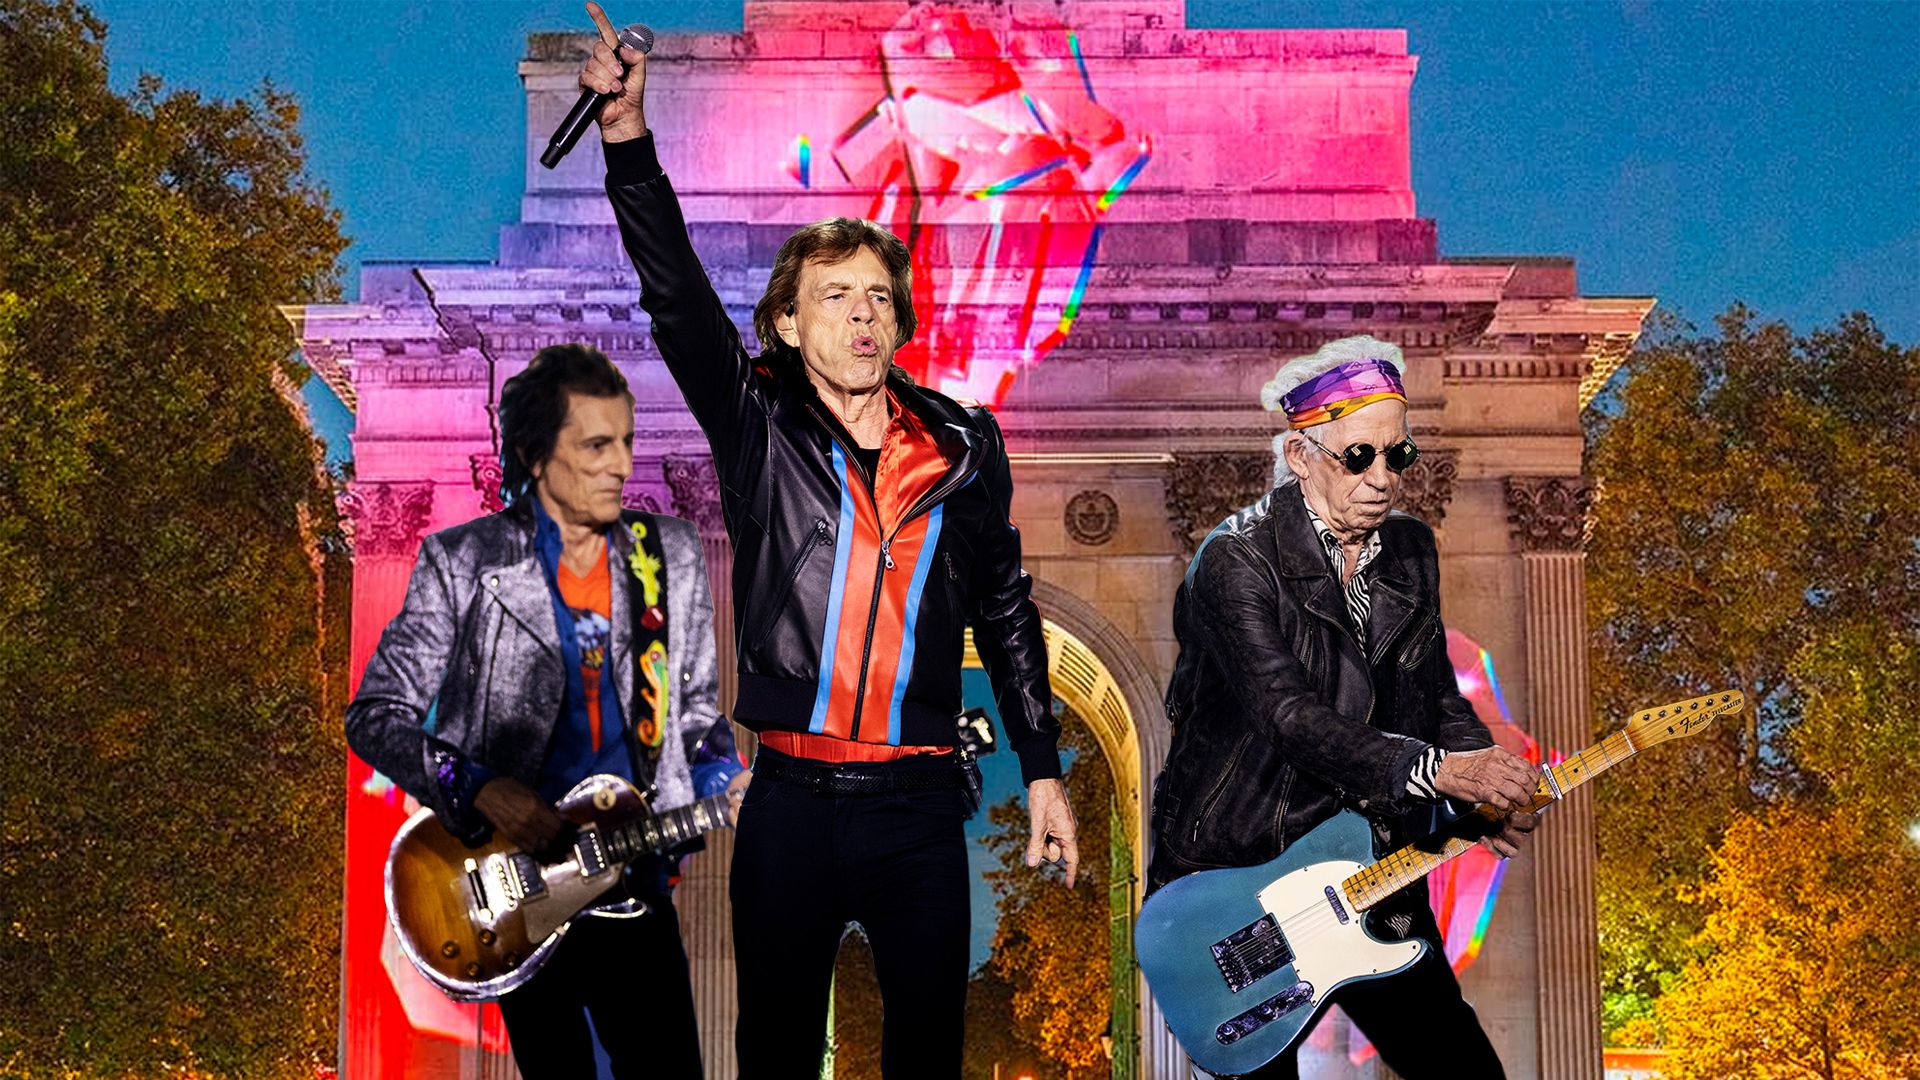 The Rolling Stones launch 60 collection to commemorate the band's epic 60th  anniversary tour